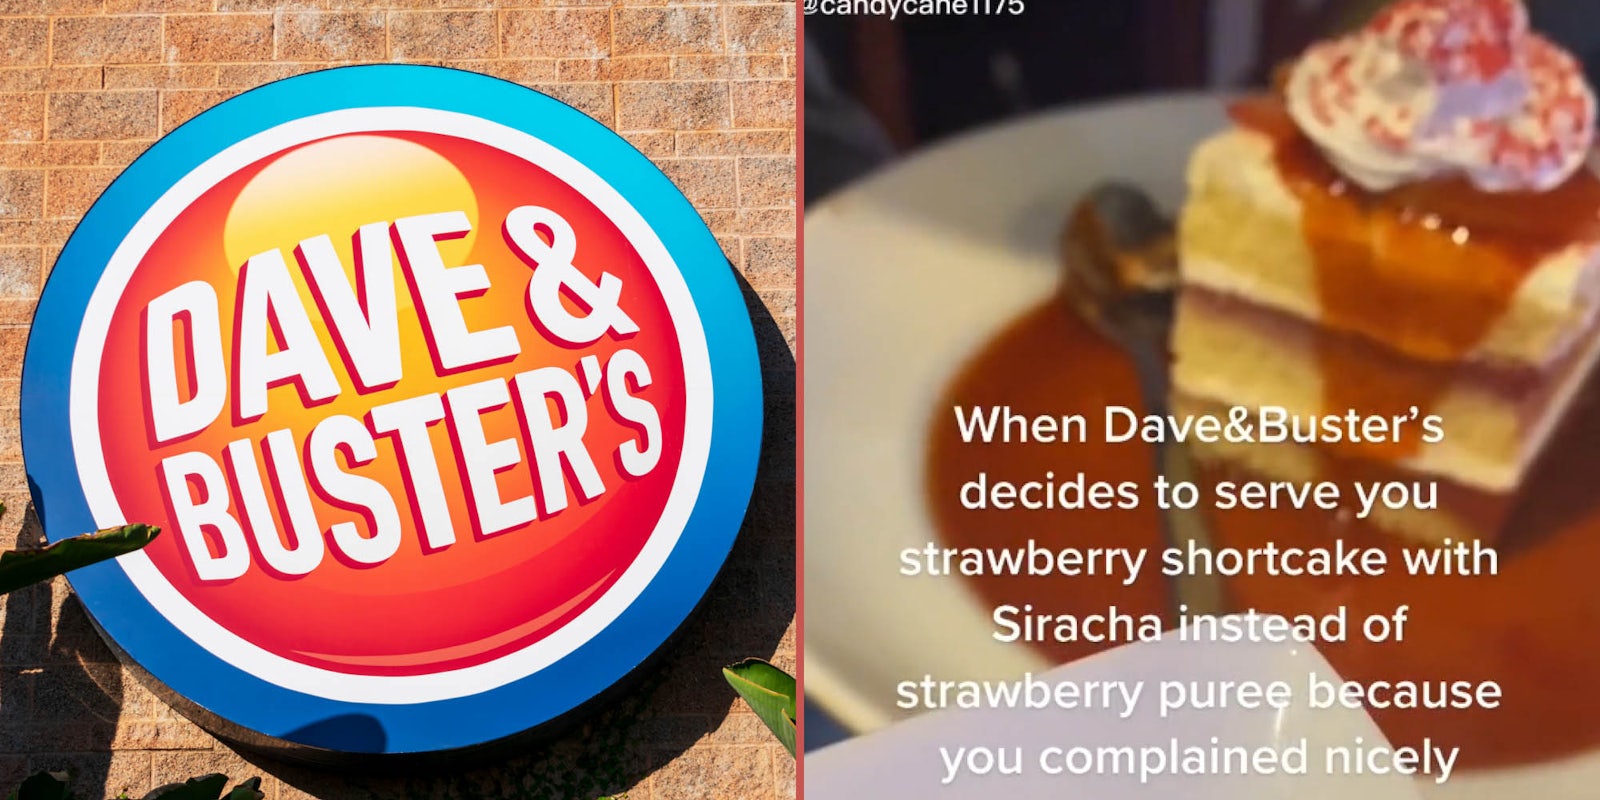 Dave and Buster's shutterstock image (l) Siracha on strawberry shortcake caption ' When Dave and Buster's decides to serve you strawberry shortcake with Siracha instead of strawberry puree because you complained nicely ' (r)